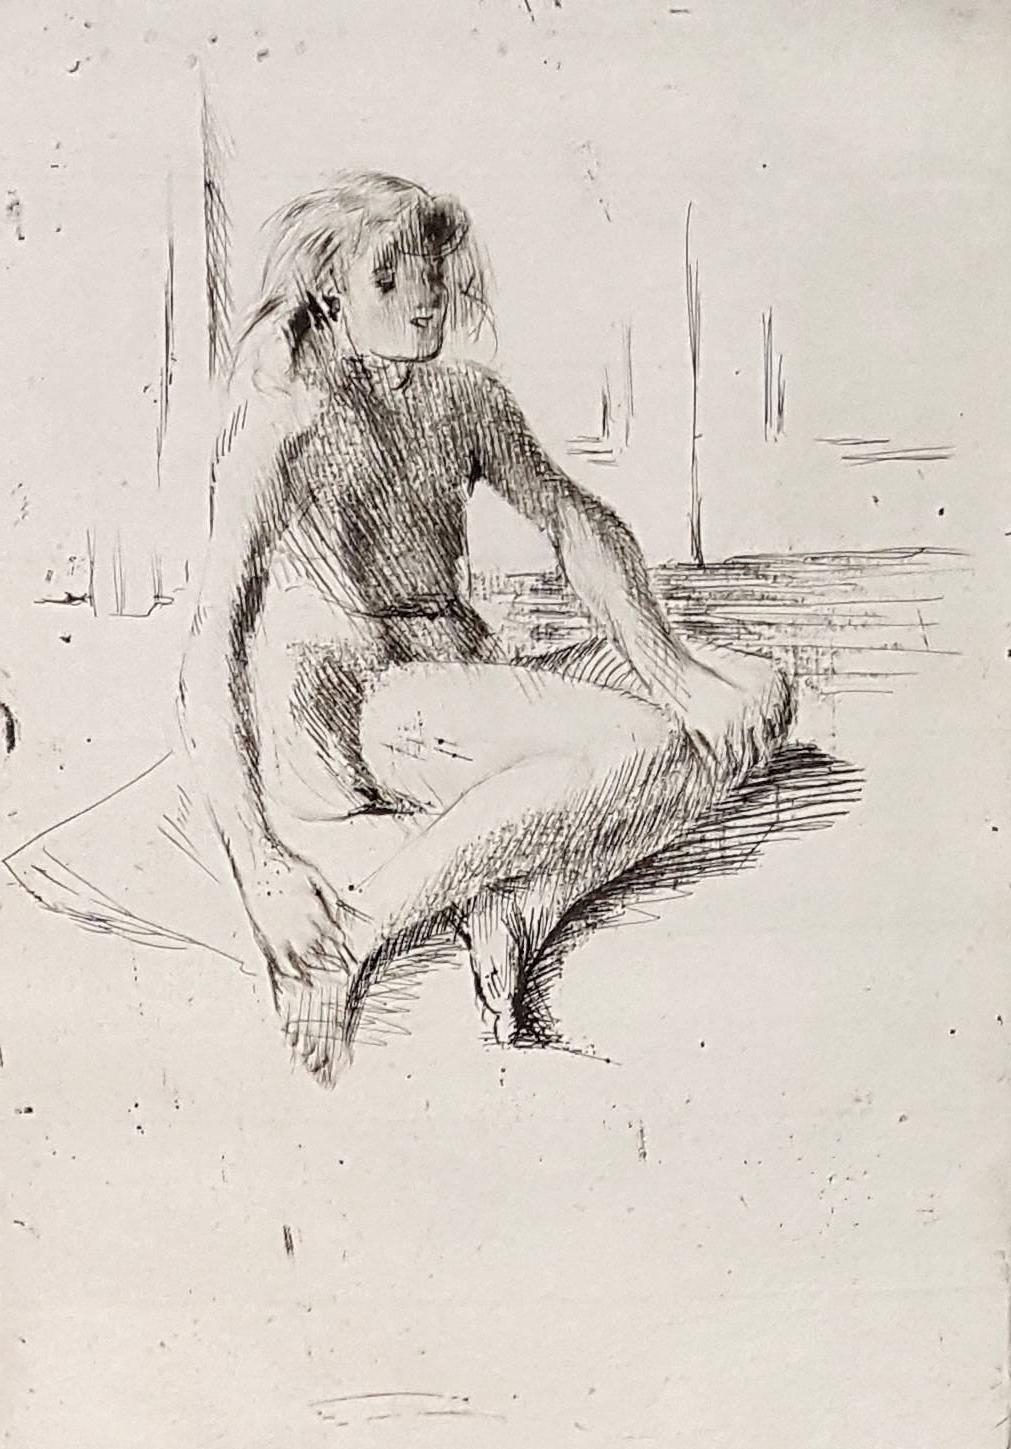 Little Girl - Original Etching Handsigned Numbered - 30 copies - Print by Jacques Villon